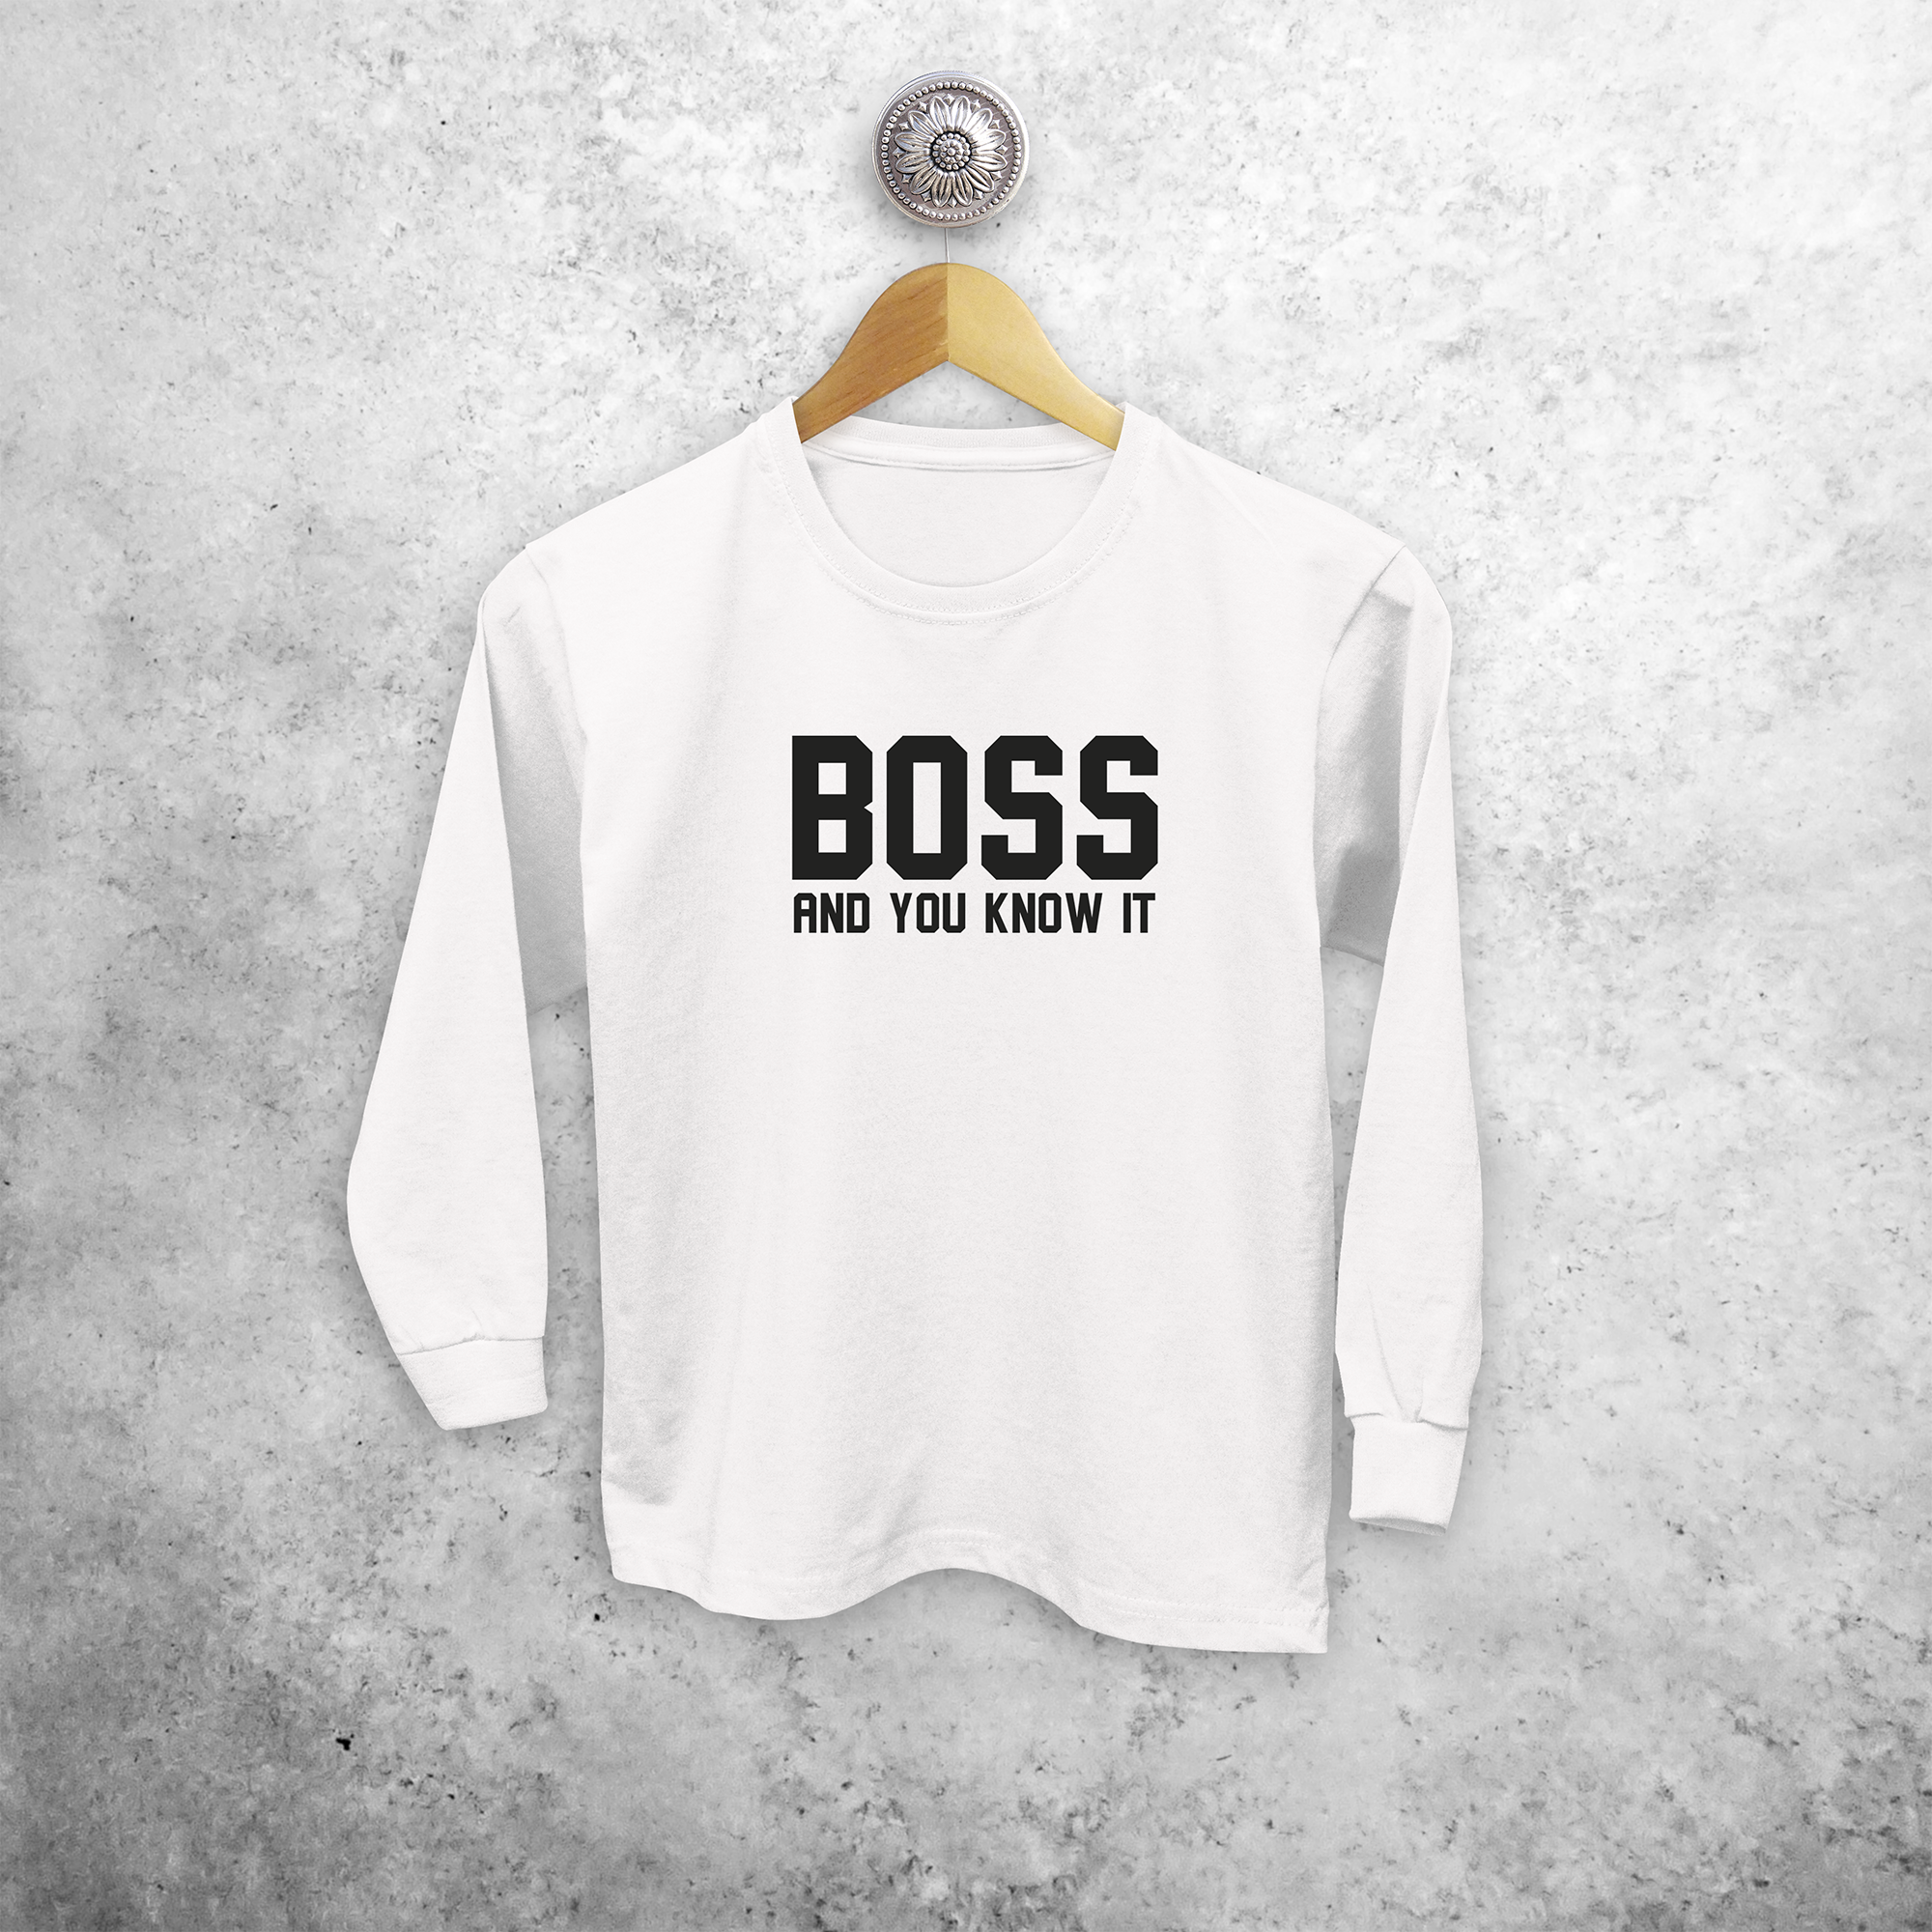 'Boss and you know it' kids longsleeve shirt